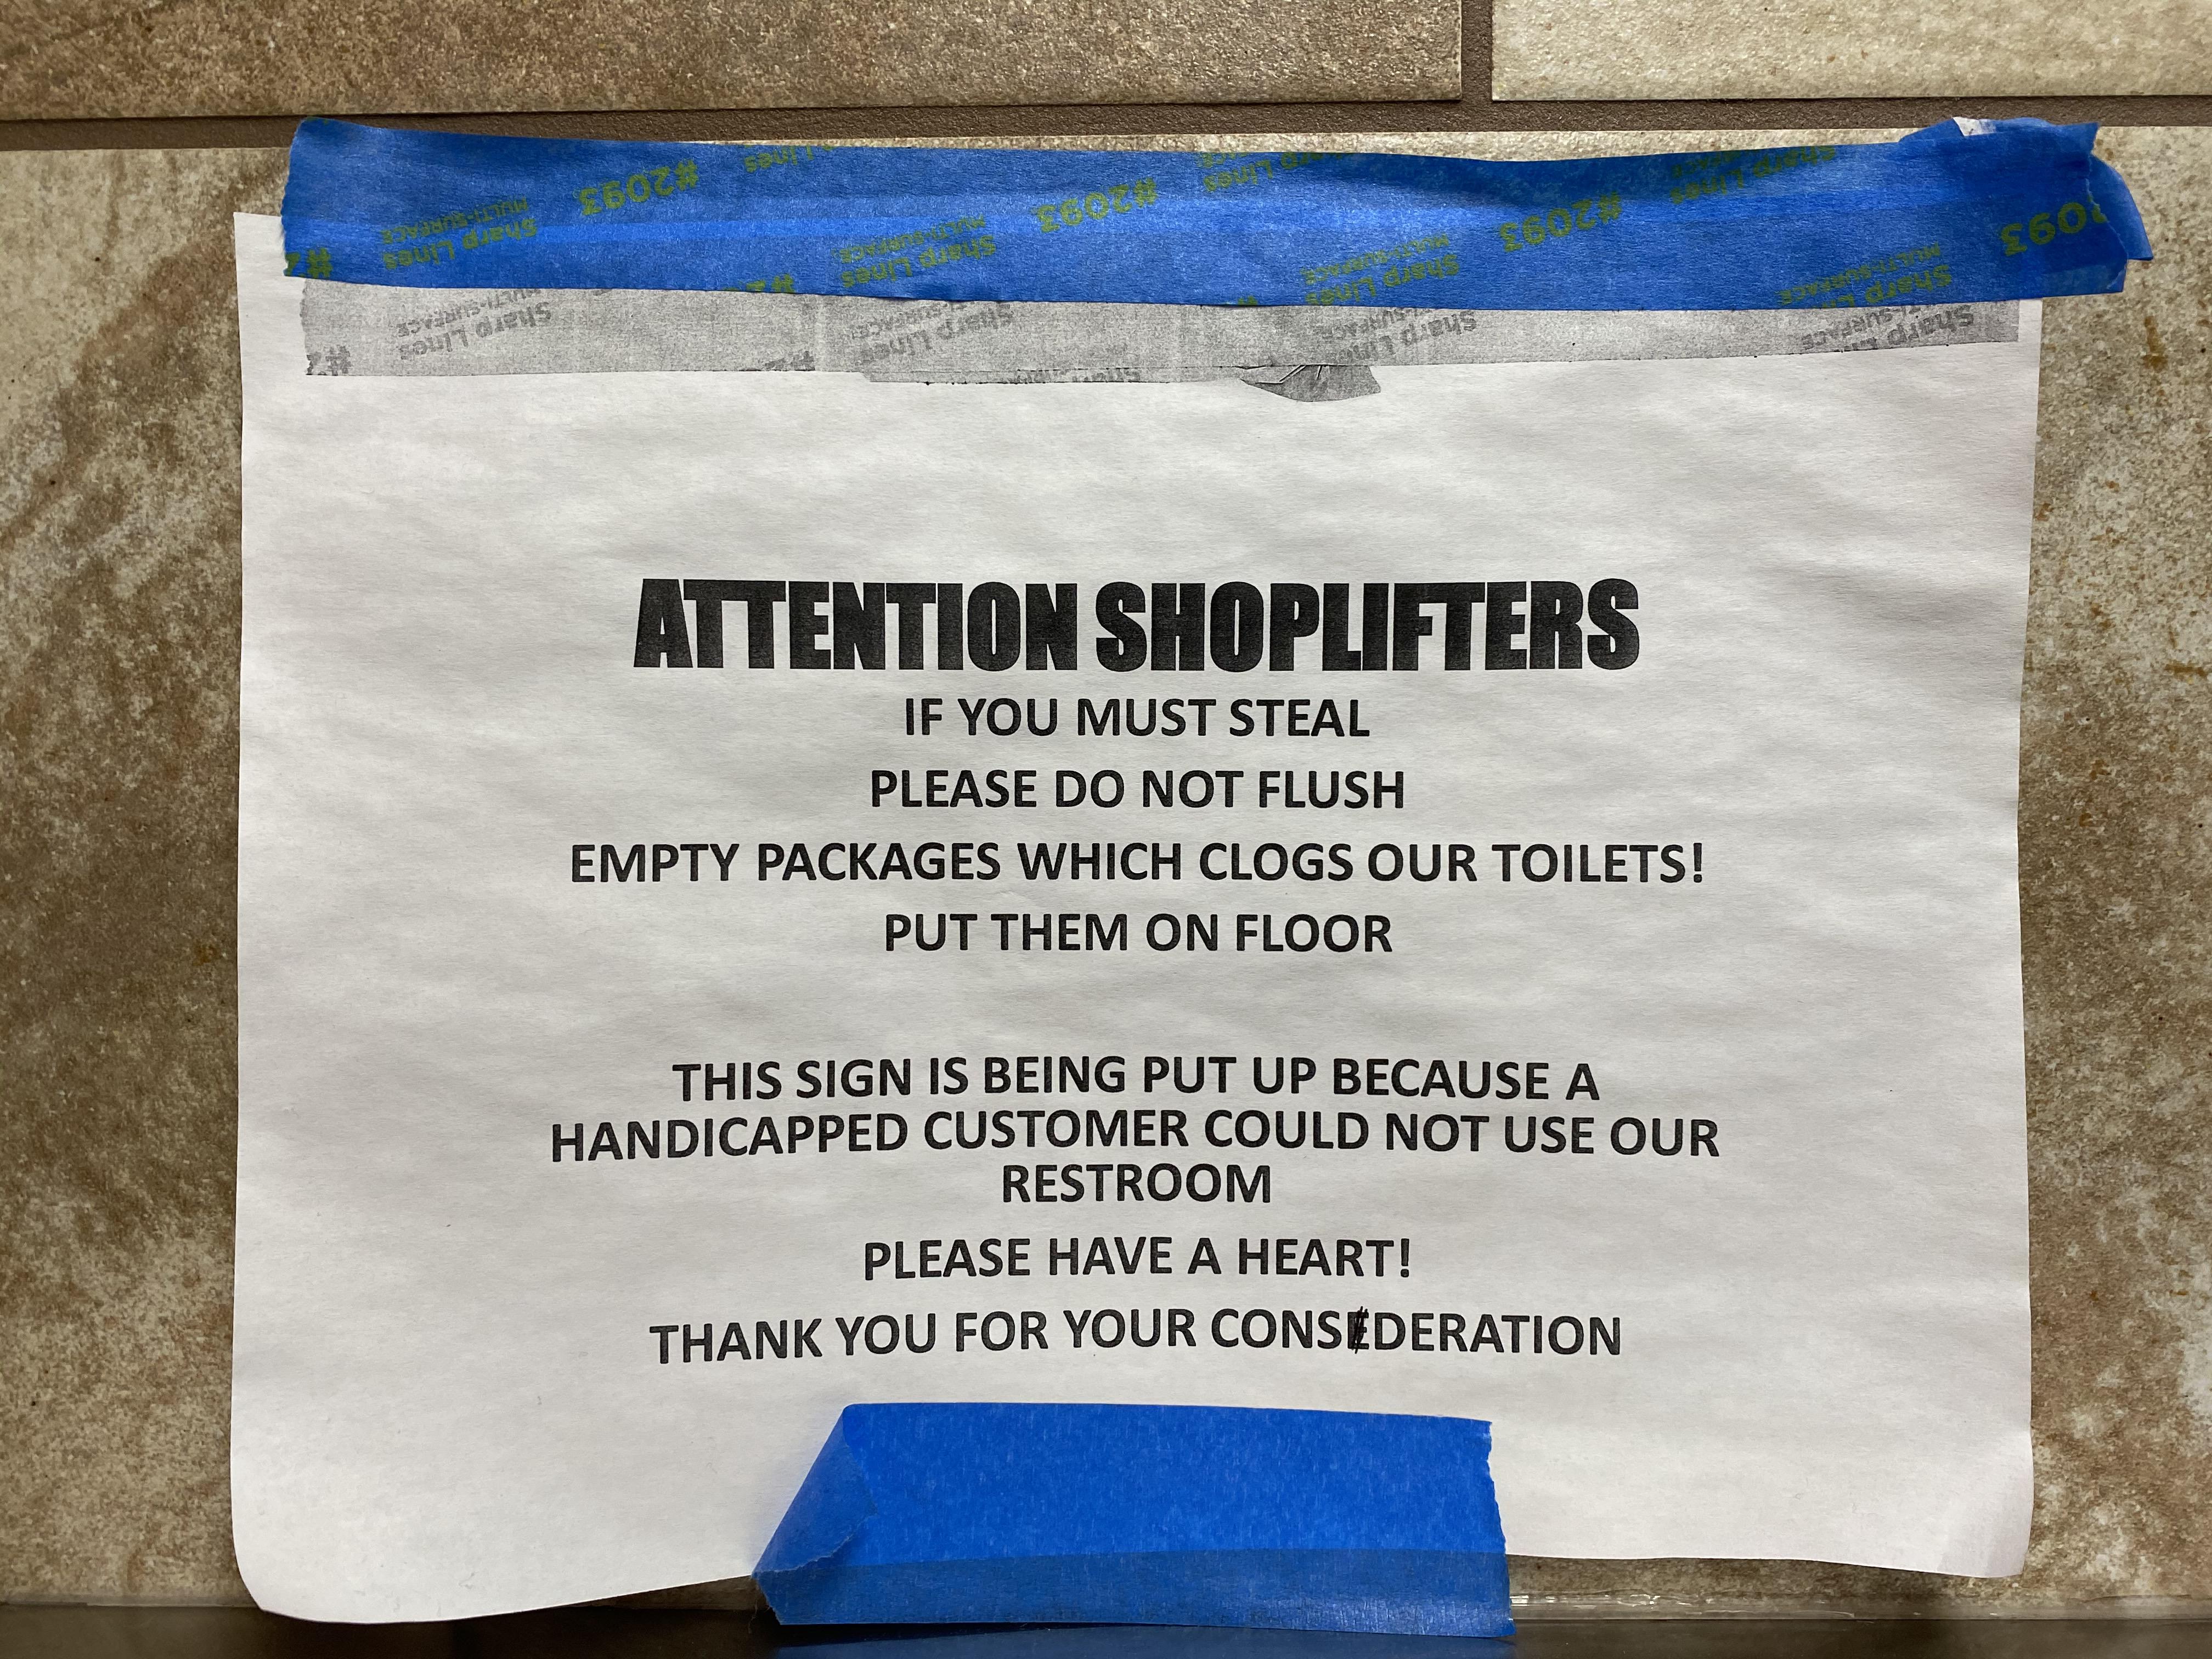 trolls gonna troll - Attention Shoplifters If You Must Steal Please Do Not Flush Empty Packages Which Clogs Our Toilets! Put Them On Floor This Sign Is Being Put Up Because A Handicapped Customer Could Not Use Our Restroom Please Have A Heart! Thank You F